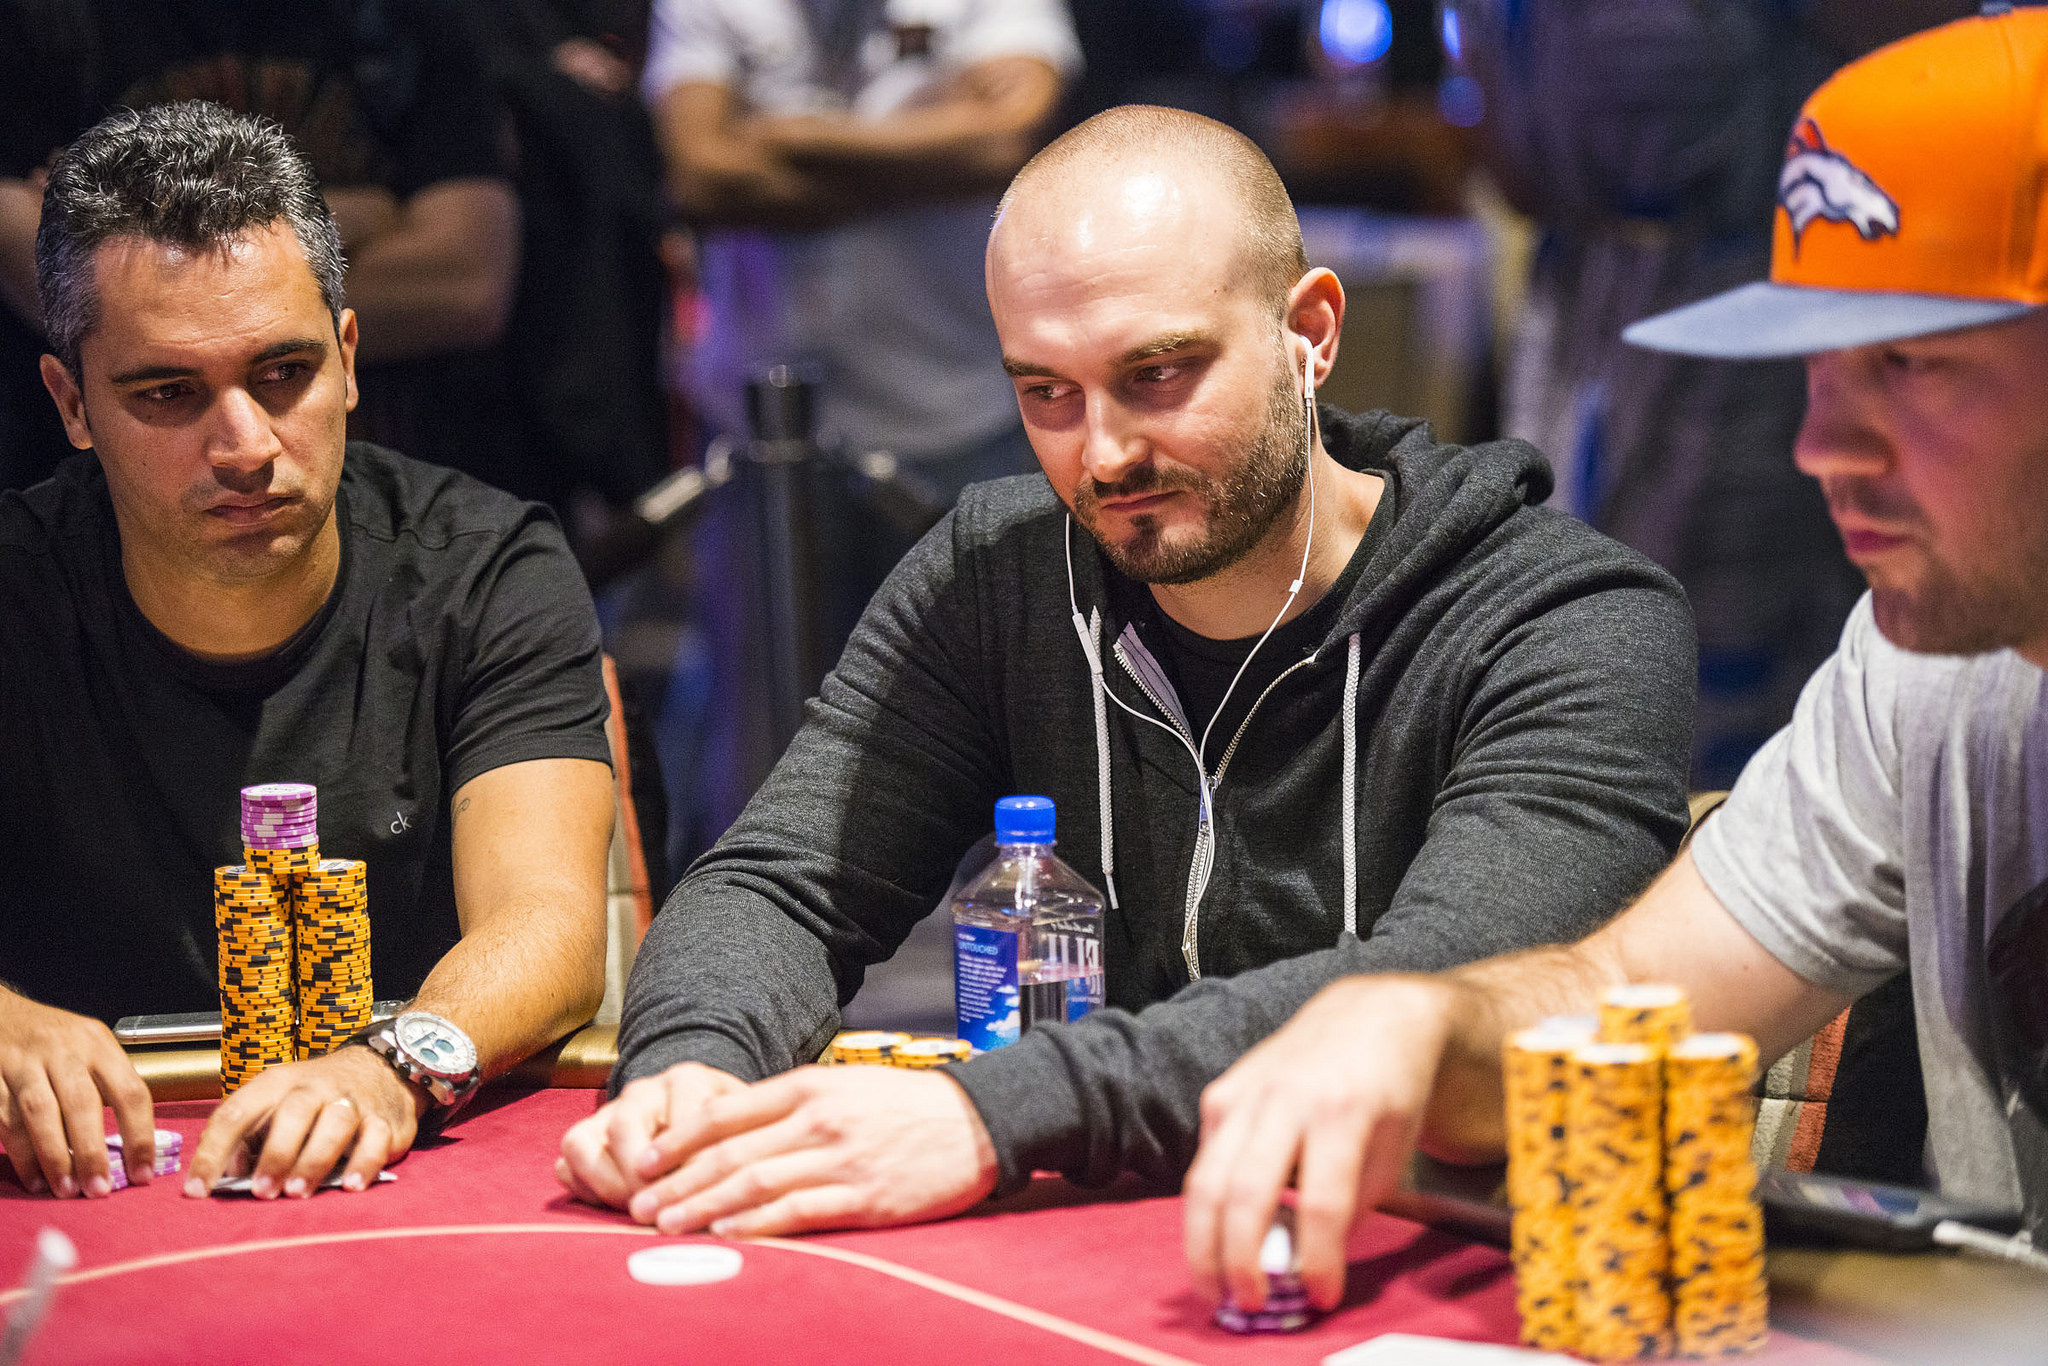 Live Dealer Etiquette: How to Behave When Interacting with Live Dealers